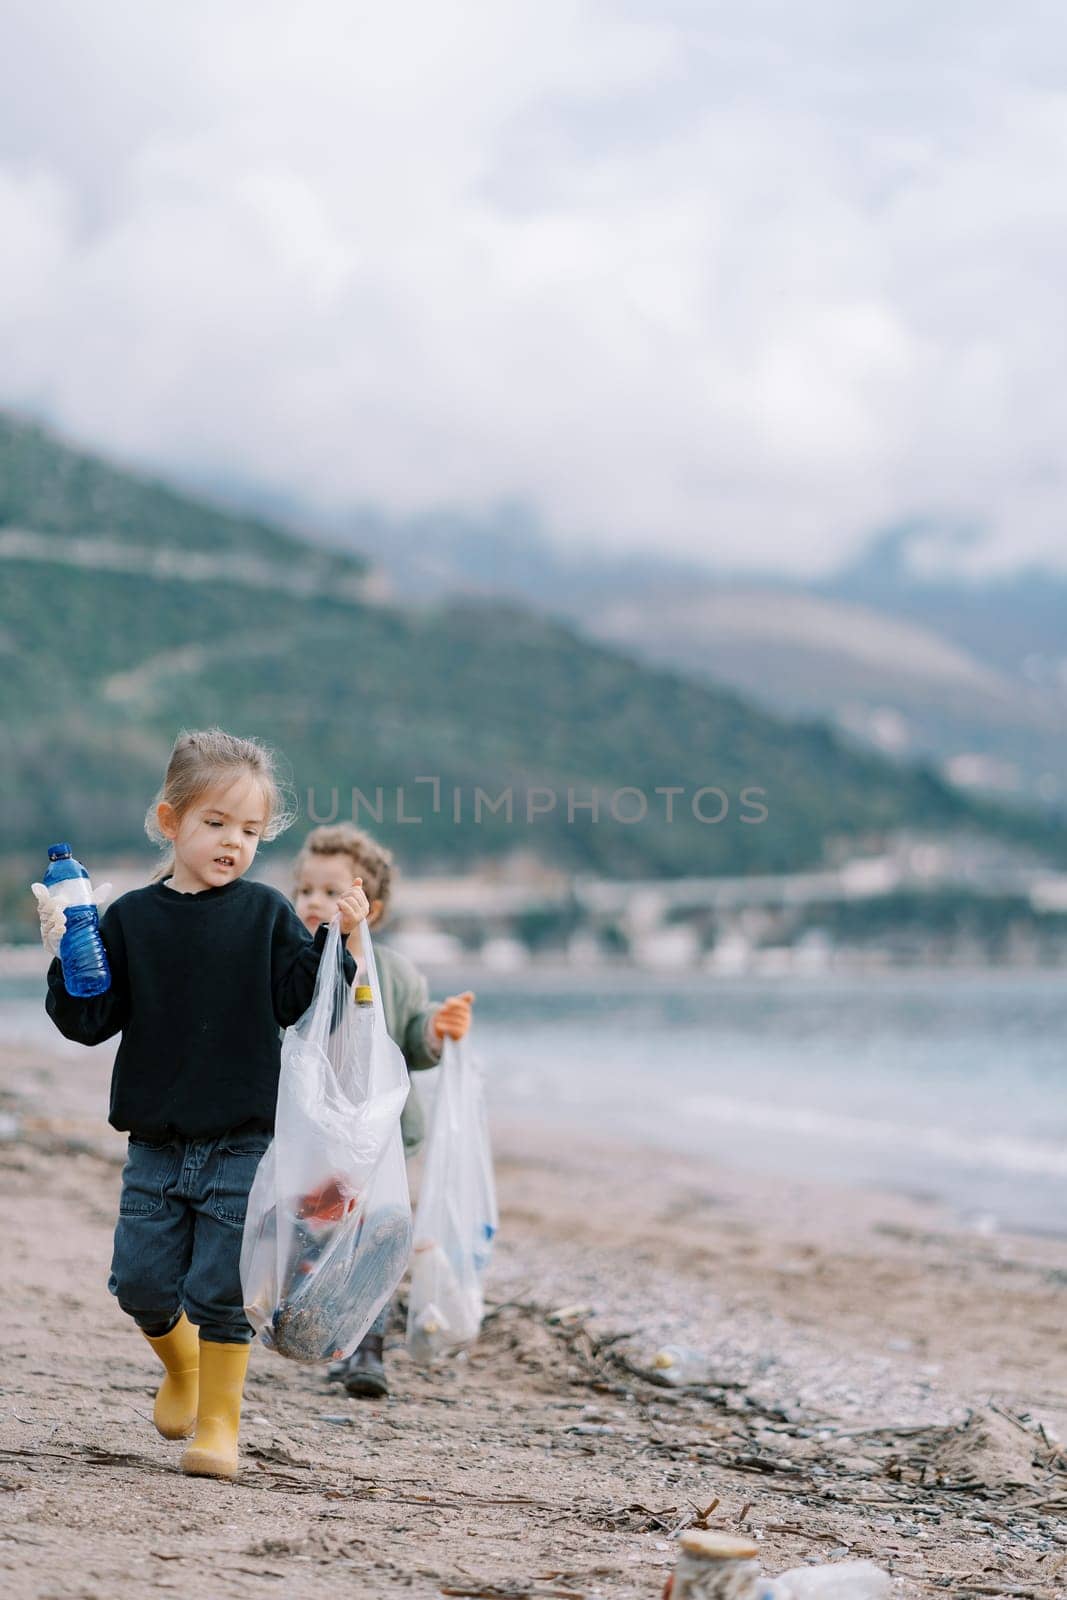 Little girls collect plastic bottles into bags on the sandy beach. High quality photo